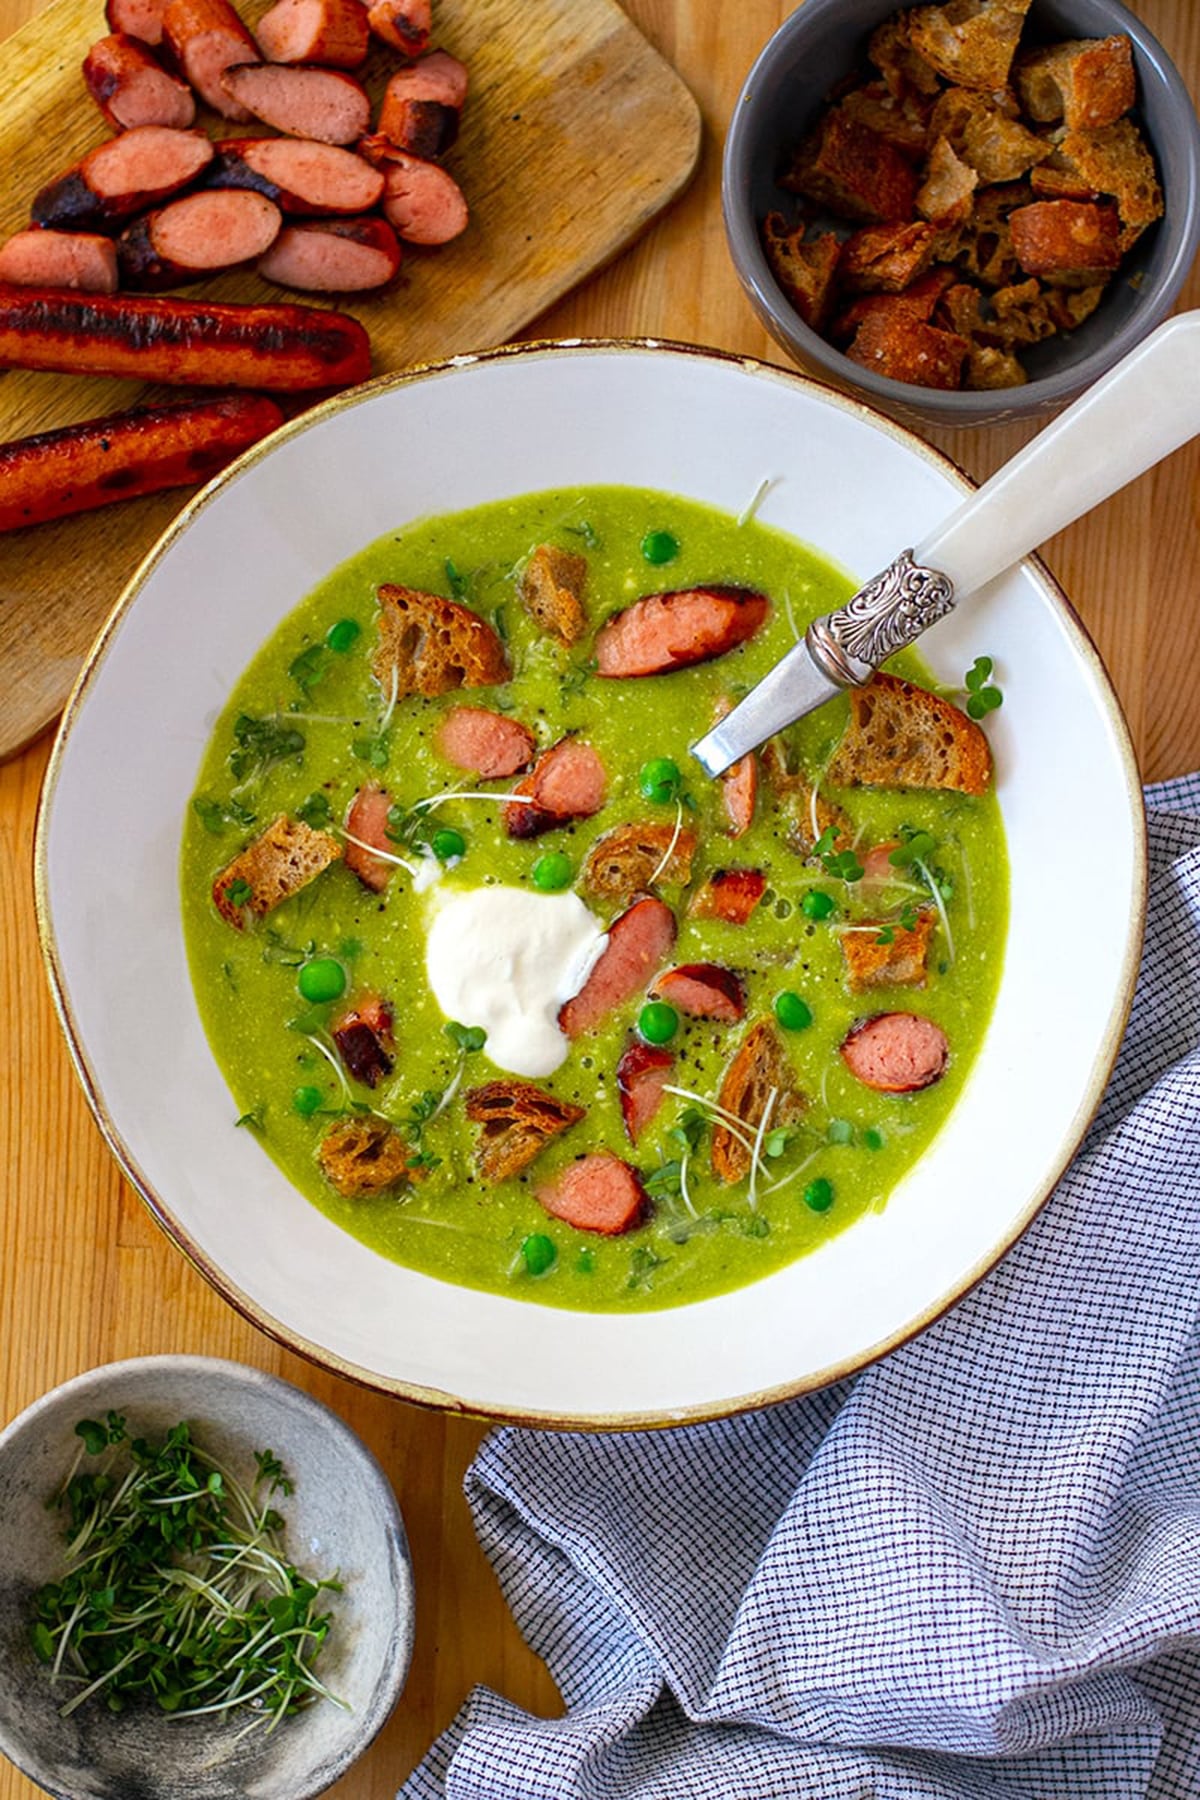 Pea Soup With Frankfurters (Hot Dogs)